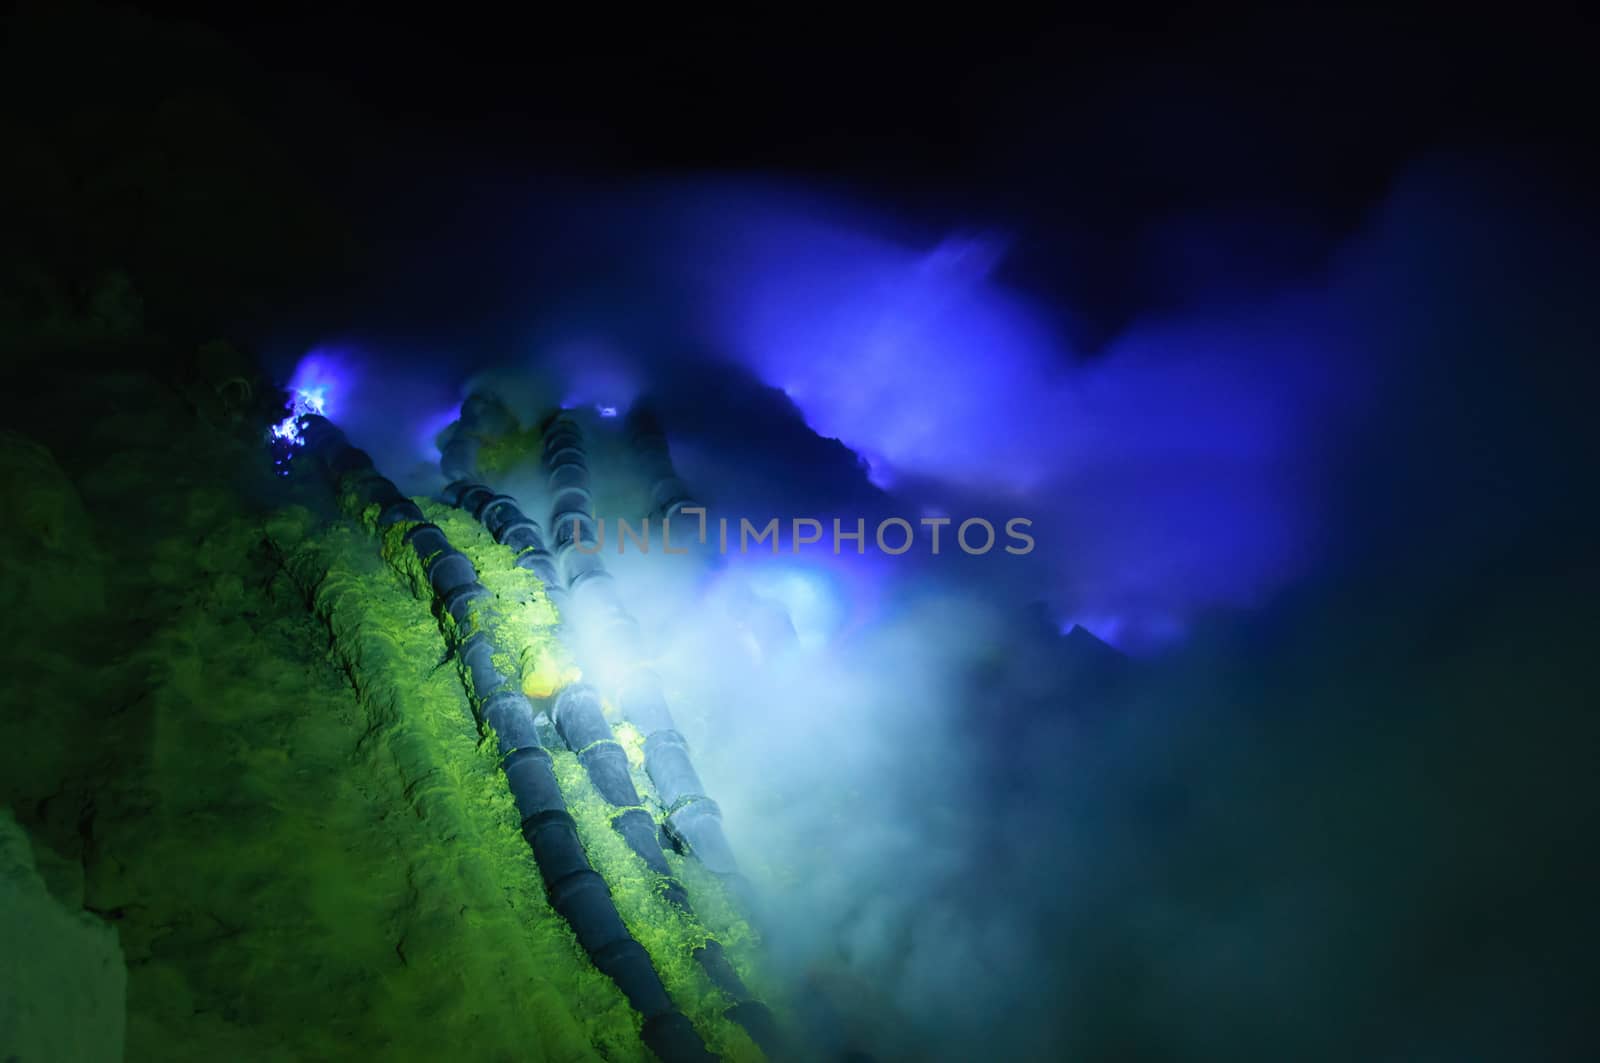 Blue fire in Ijen volcano, travel destination in Indonesia by johnnychaos